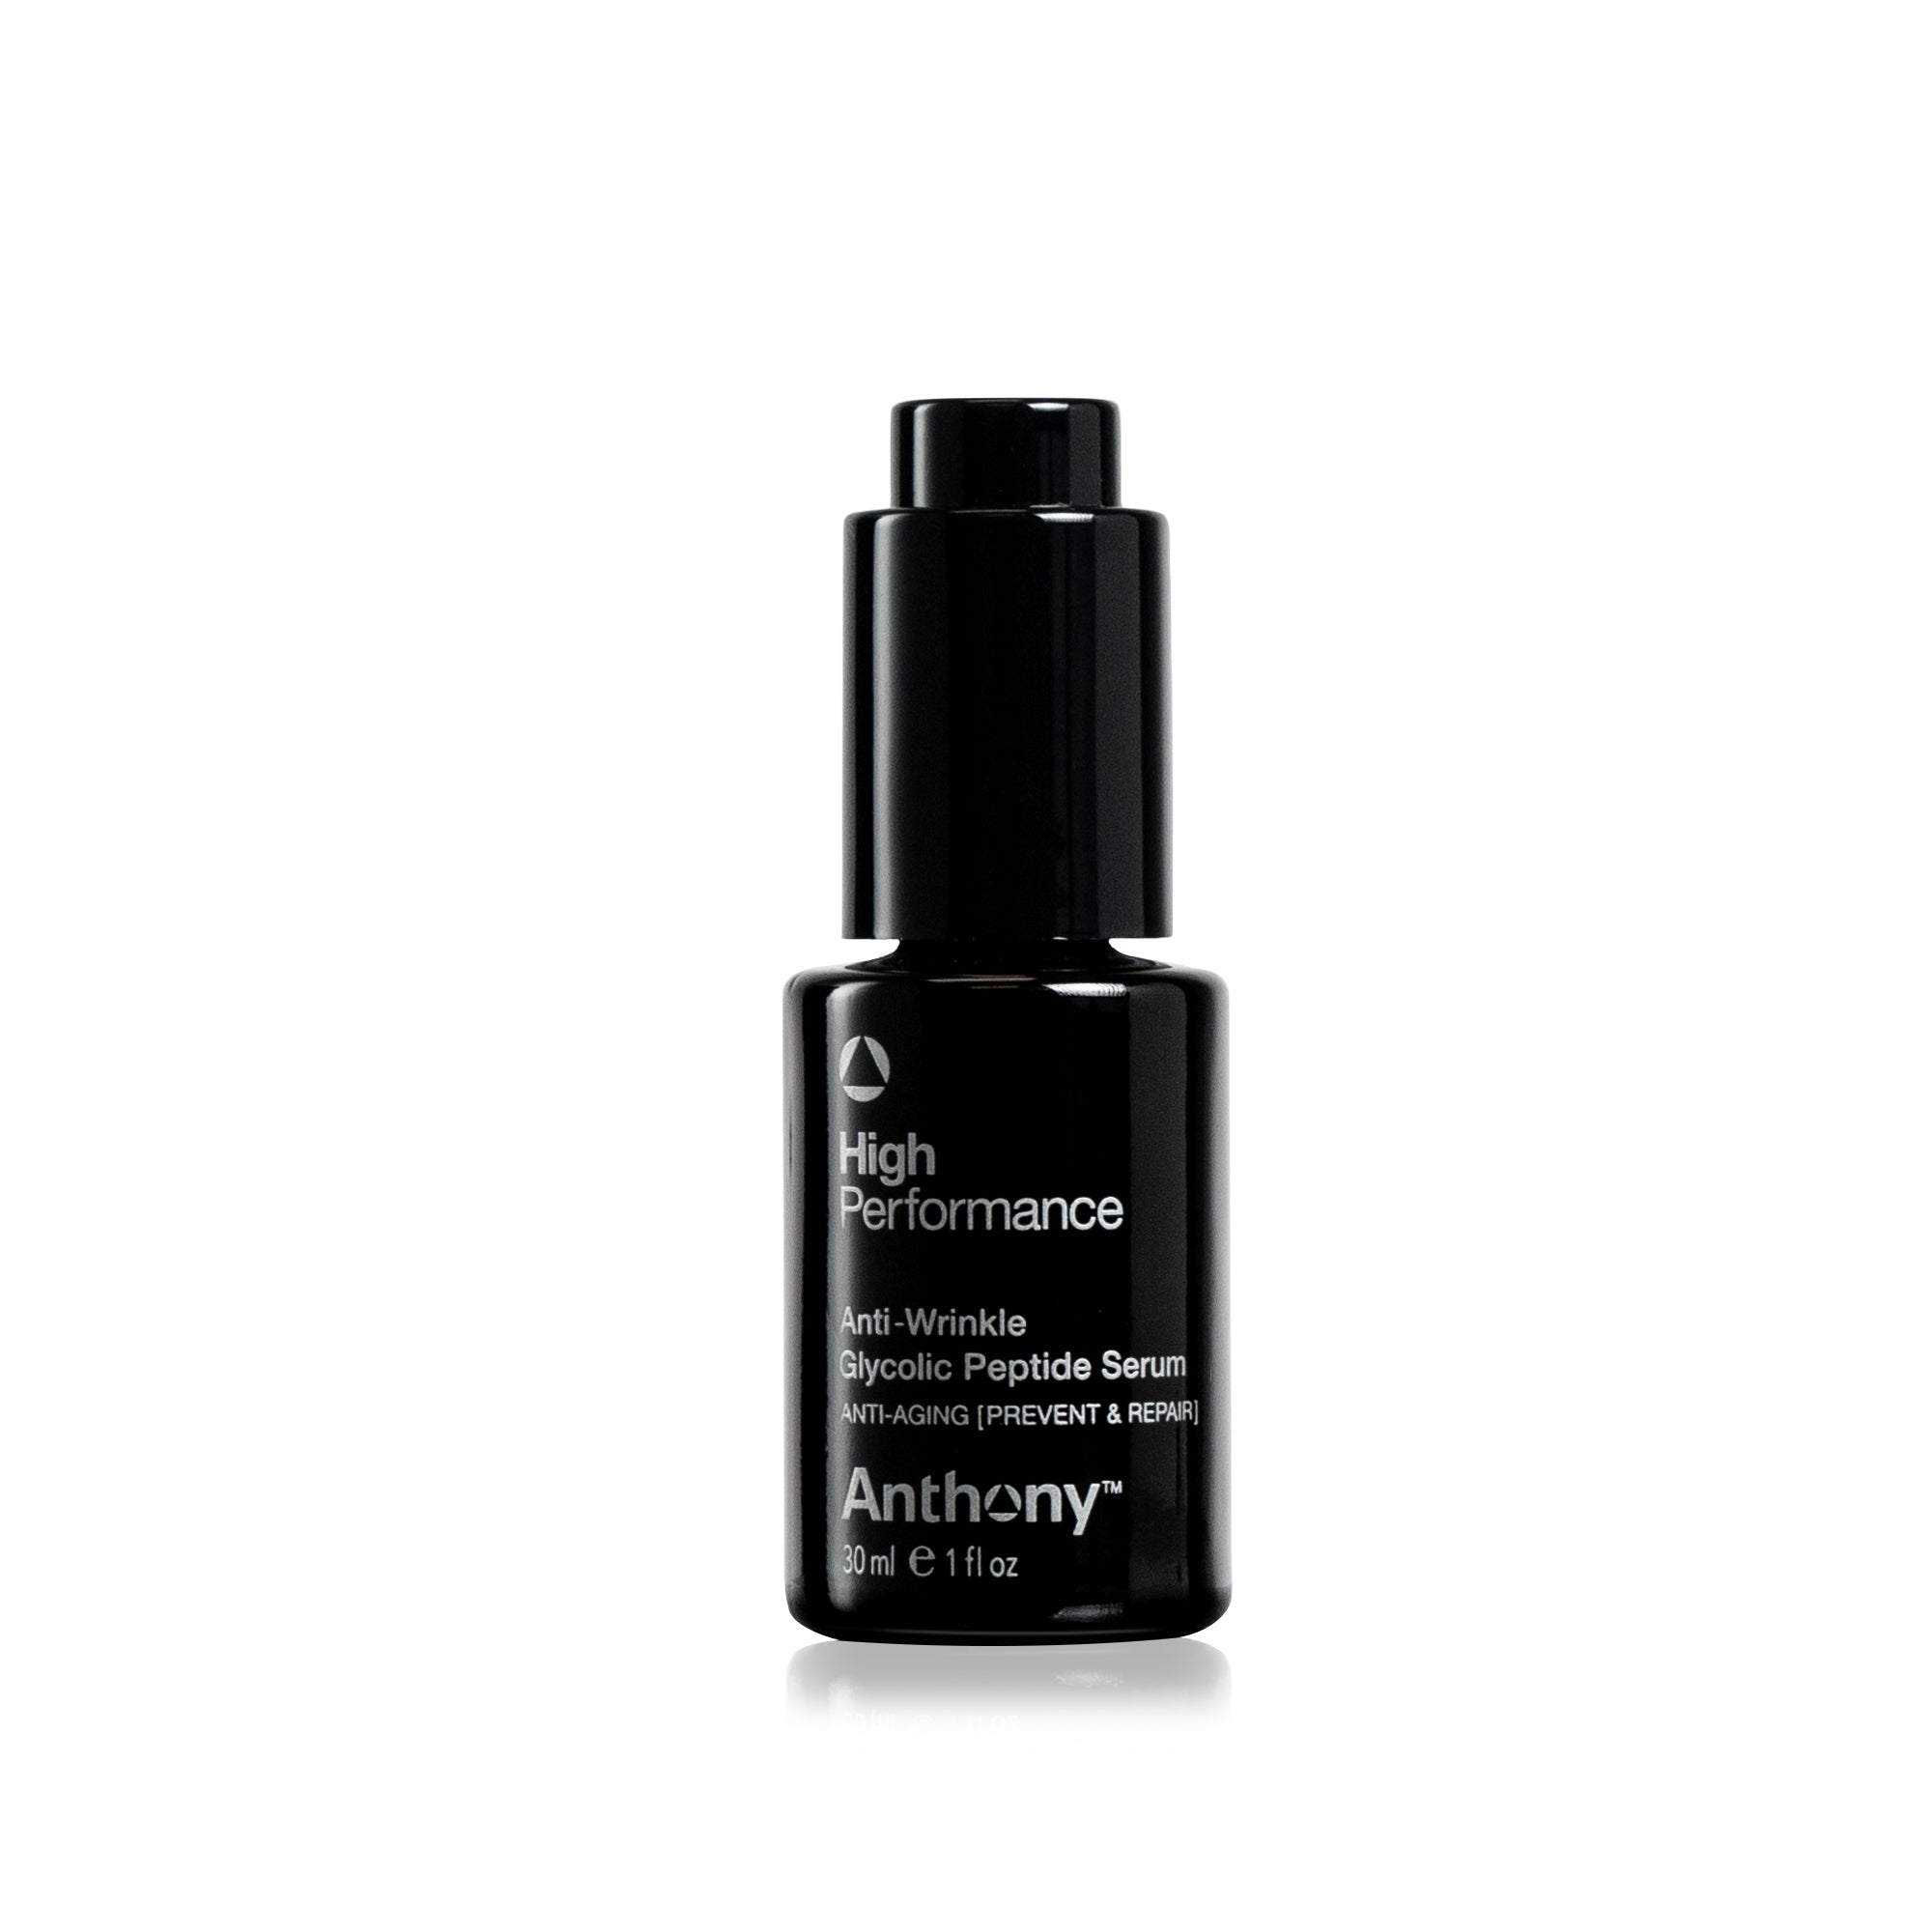 Anti-Wrinkle Glycolic Peptide Serum  Powerful Anti-aging and Lifting -  Anthony Skincare For Men